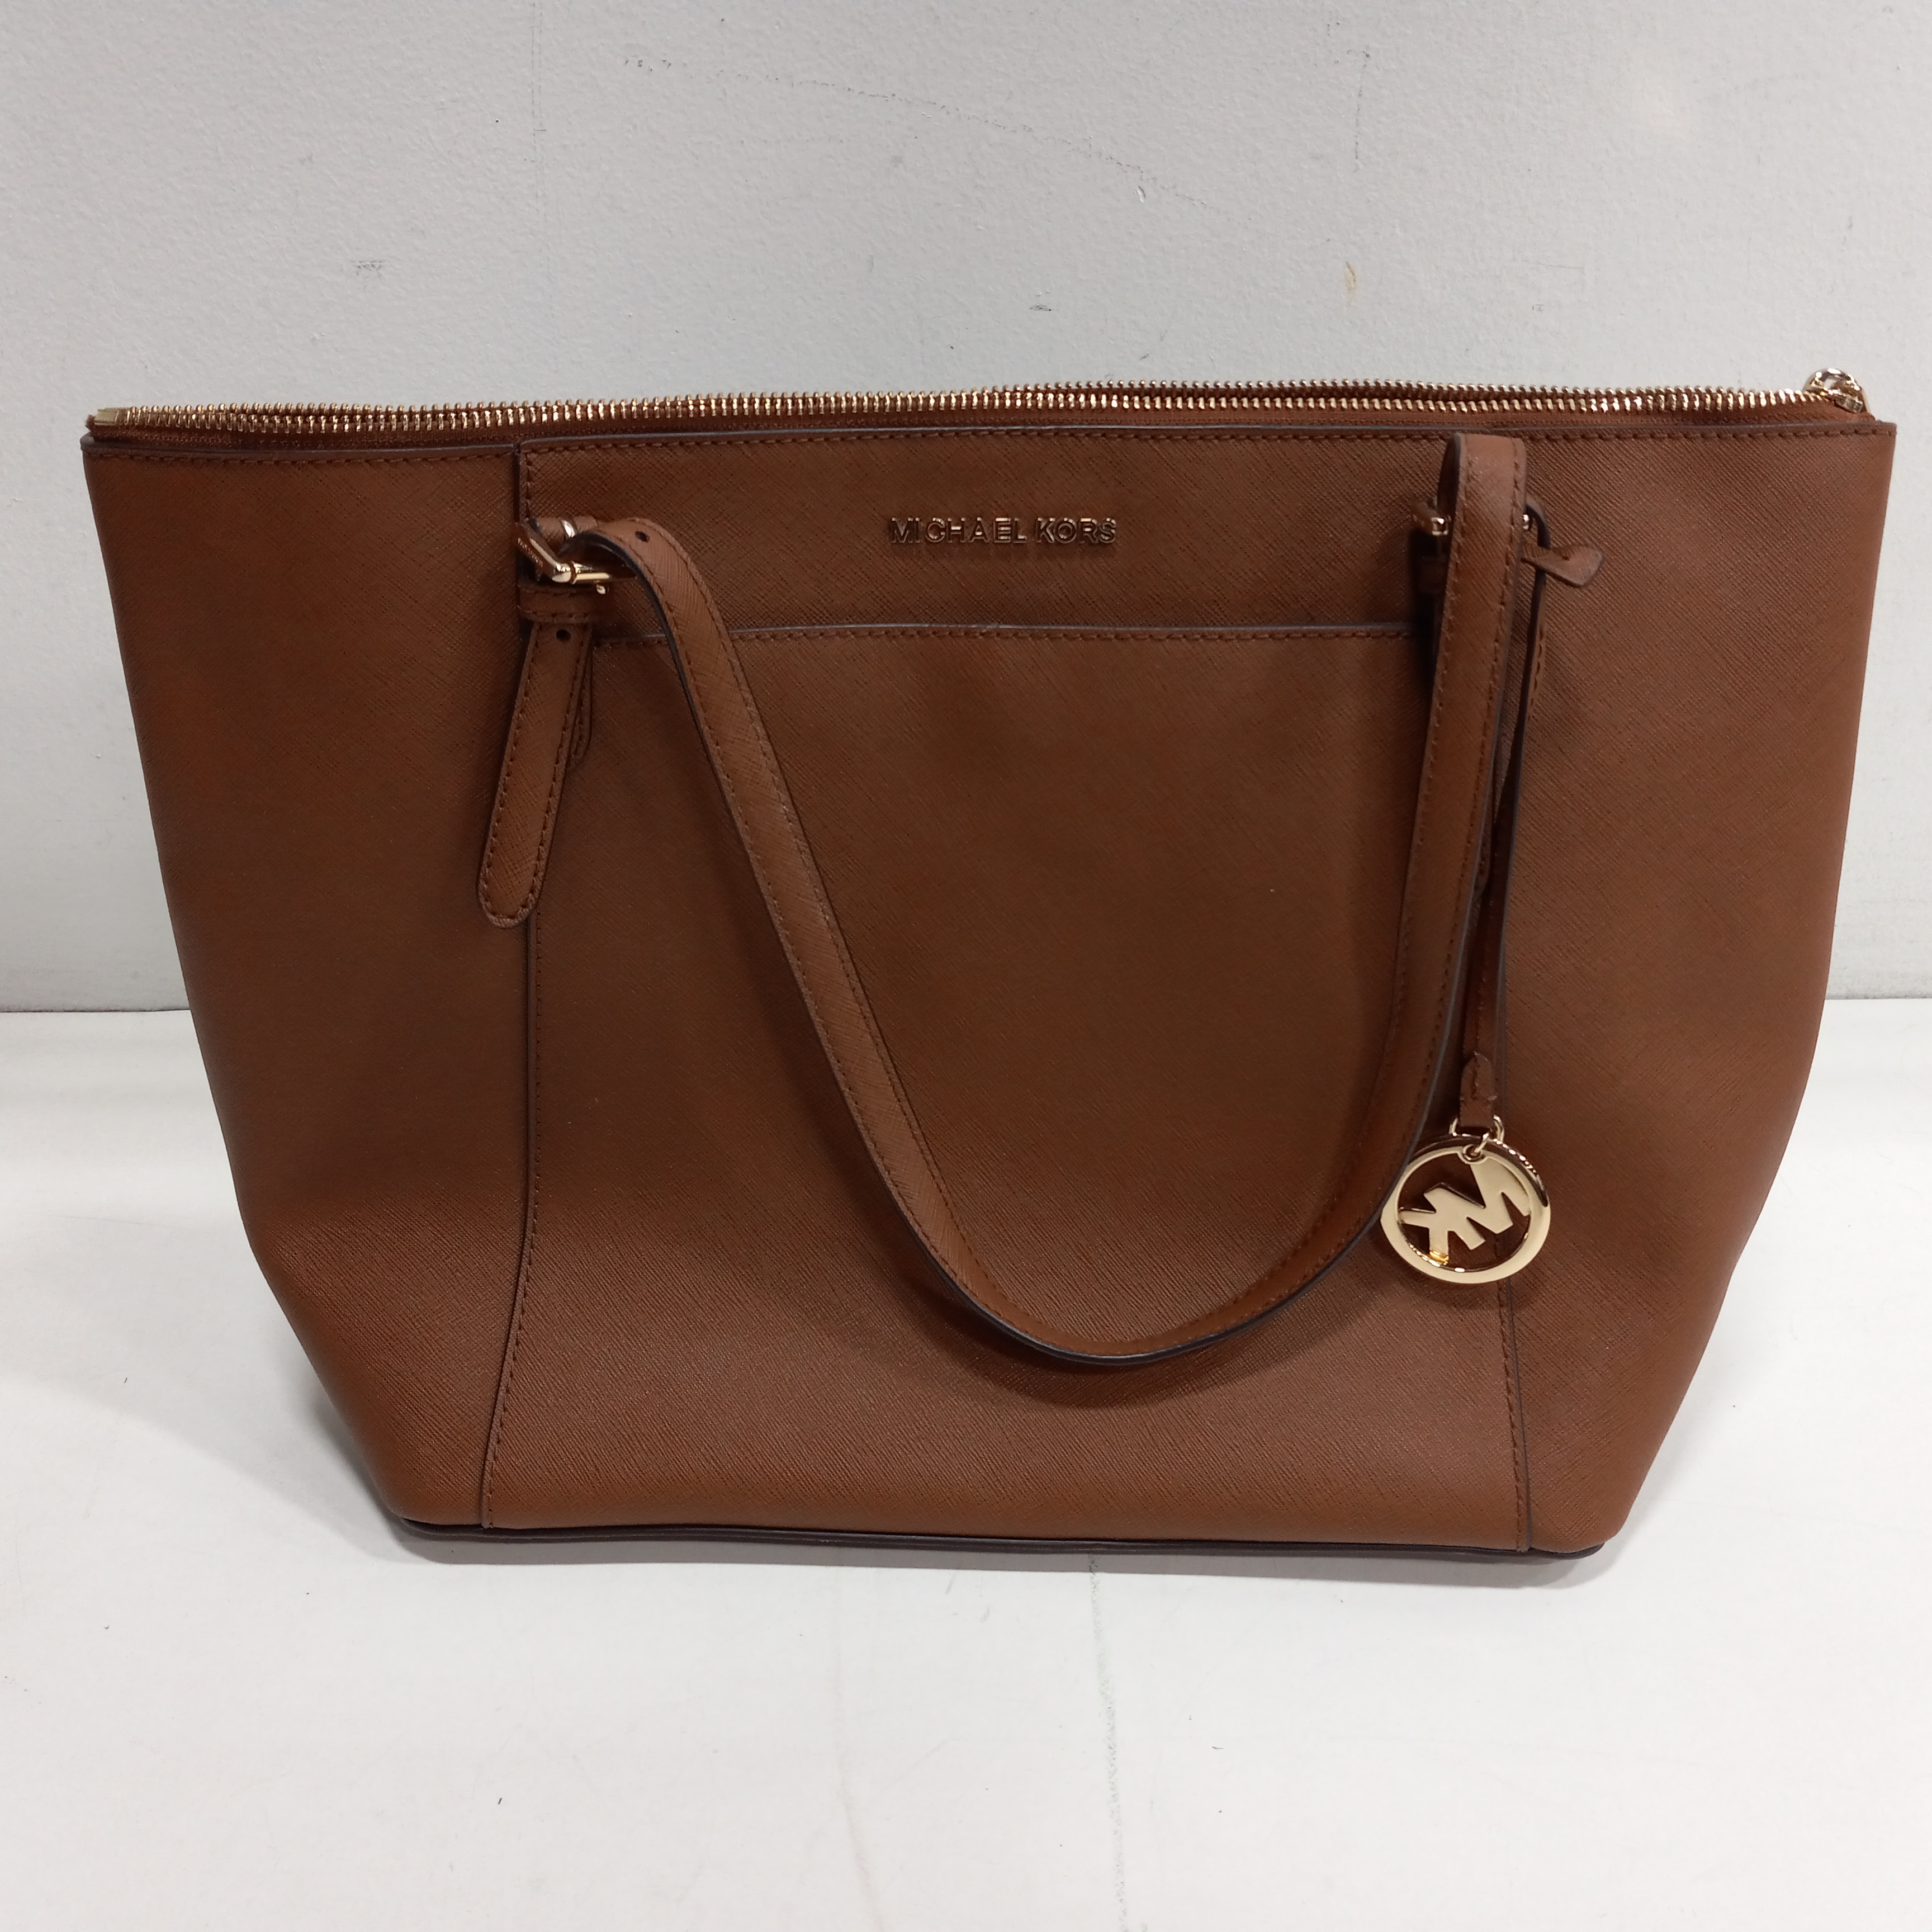 Michael Kors Voyager Large Saffiano Leather Top-Zip Tote Bag